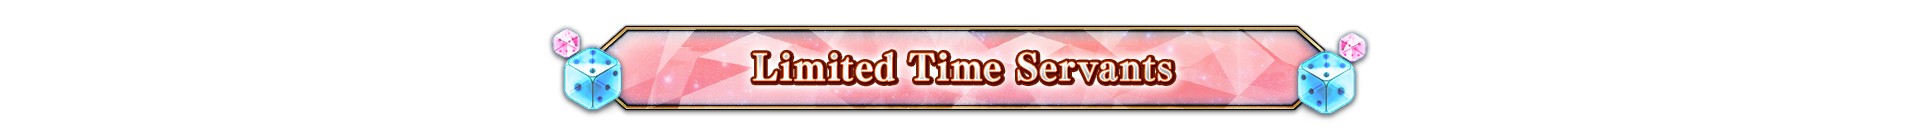 Limited Time Servants